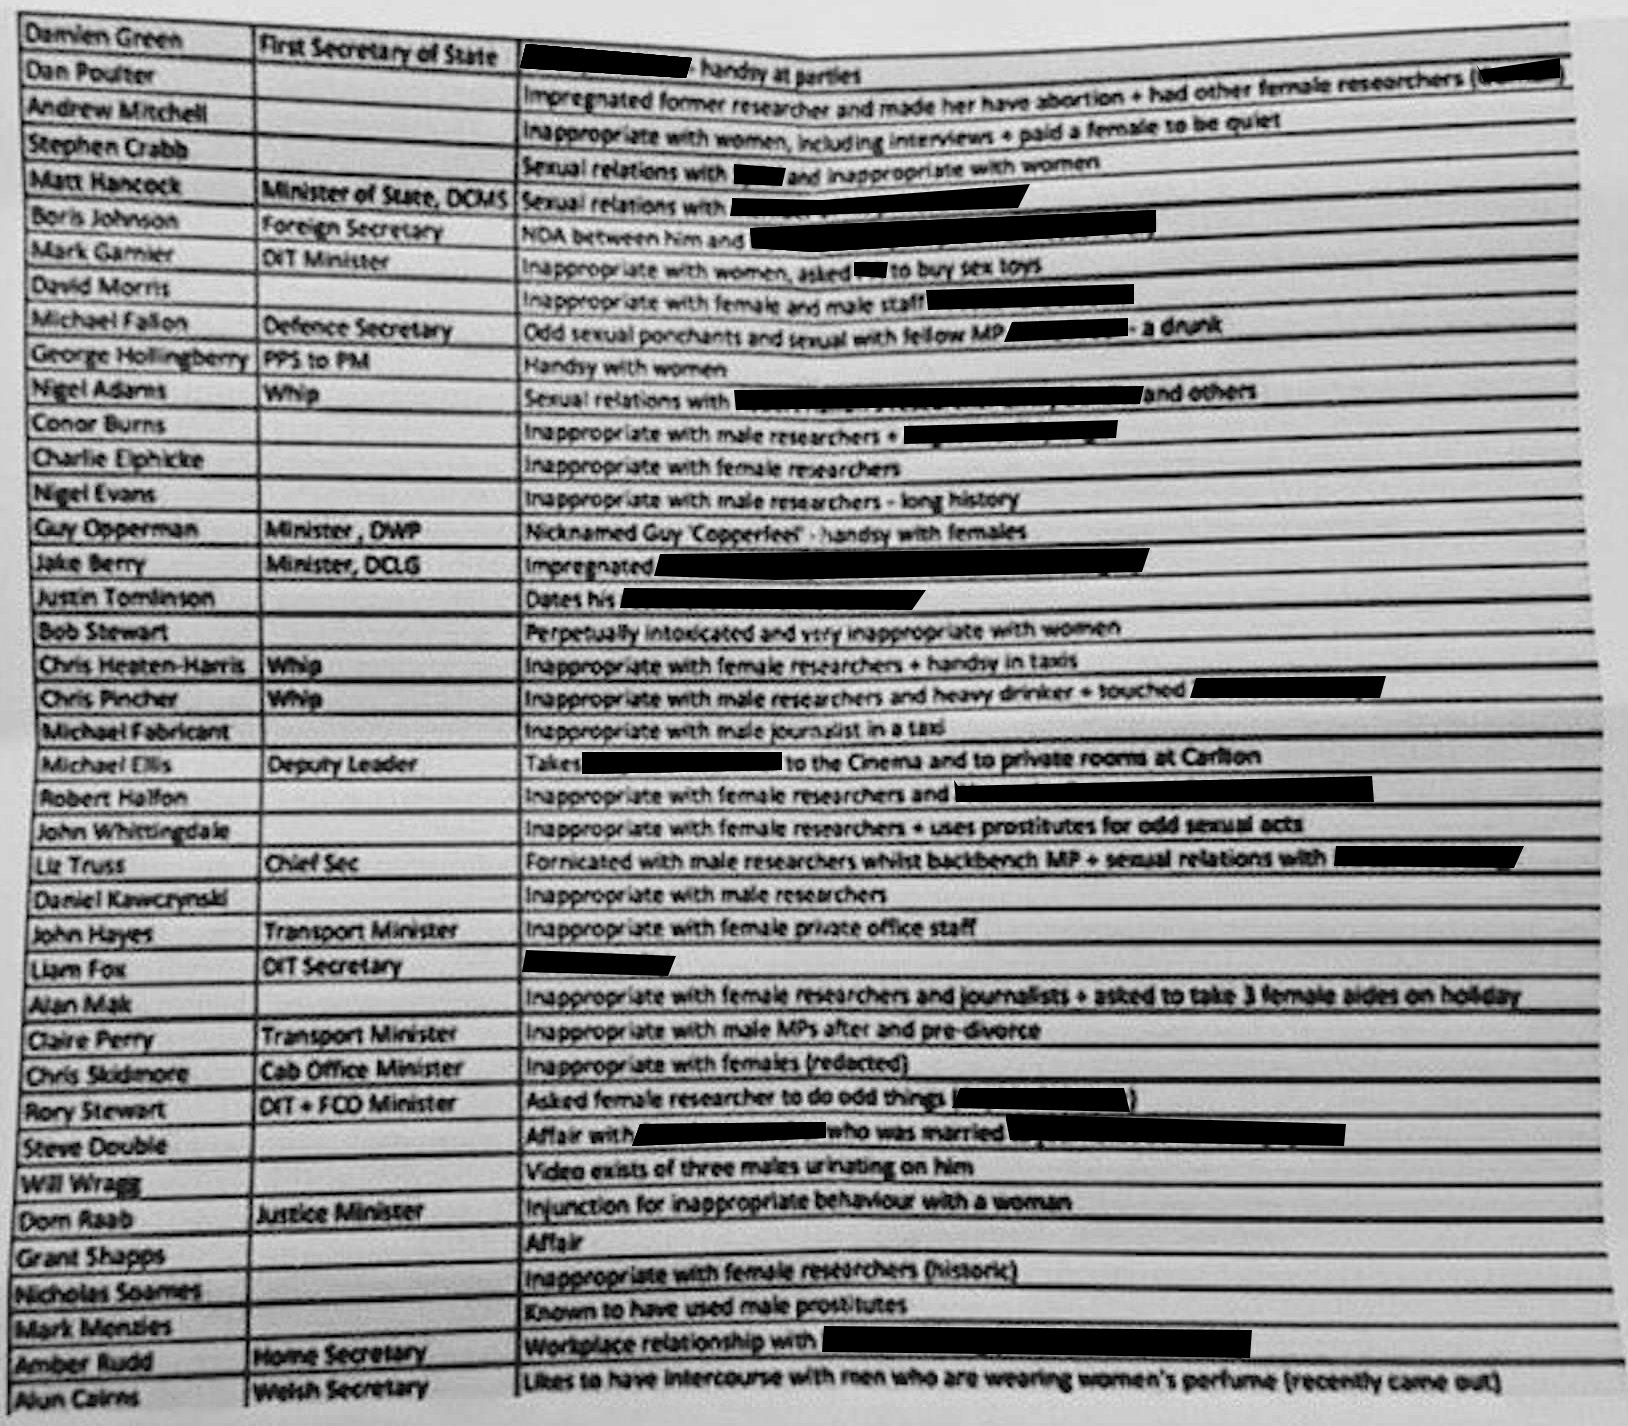 Mp Spreadsheet Intended For The Unredacted Spreadsheet Of 40 Tory Mps Accused Of Inappropriate